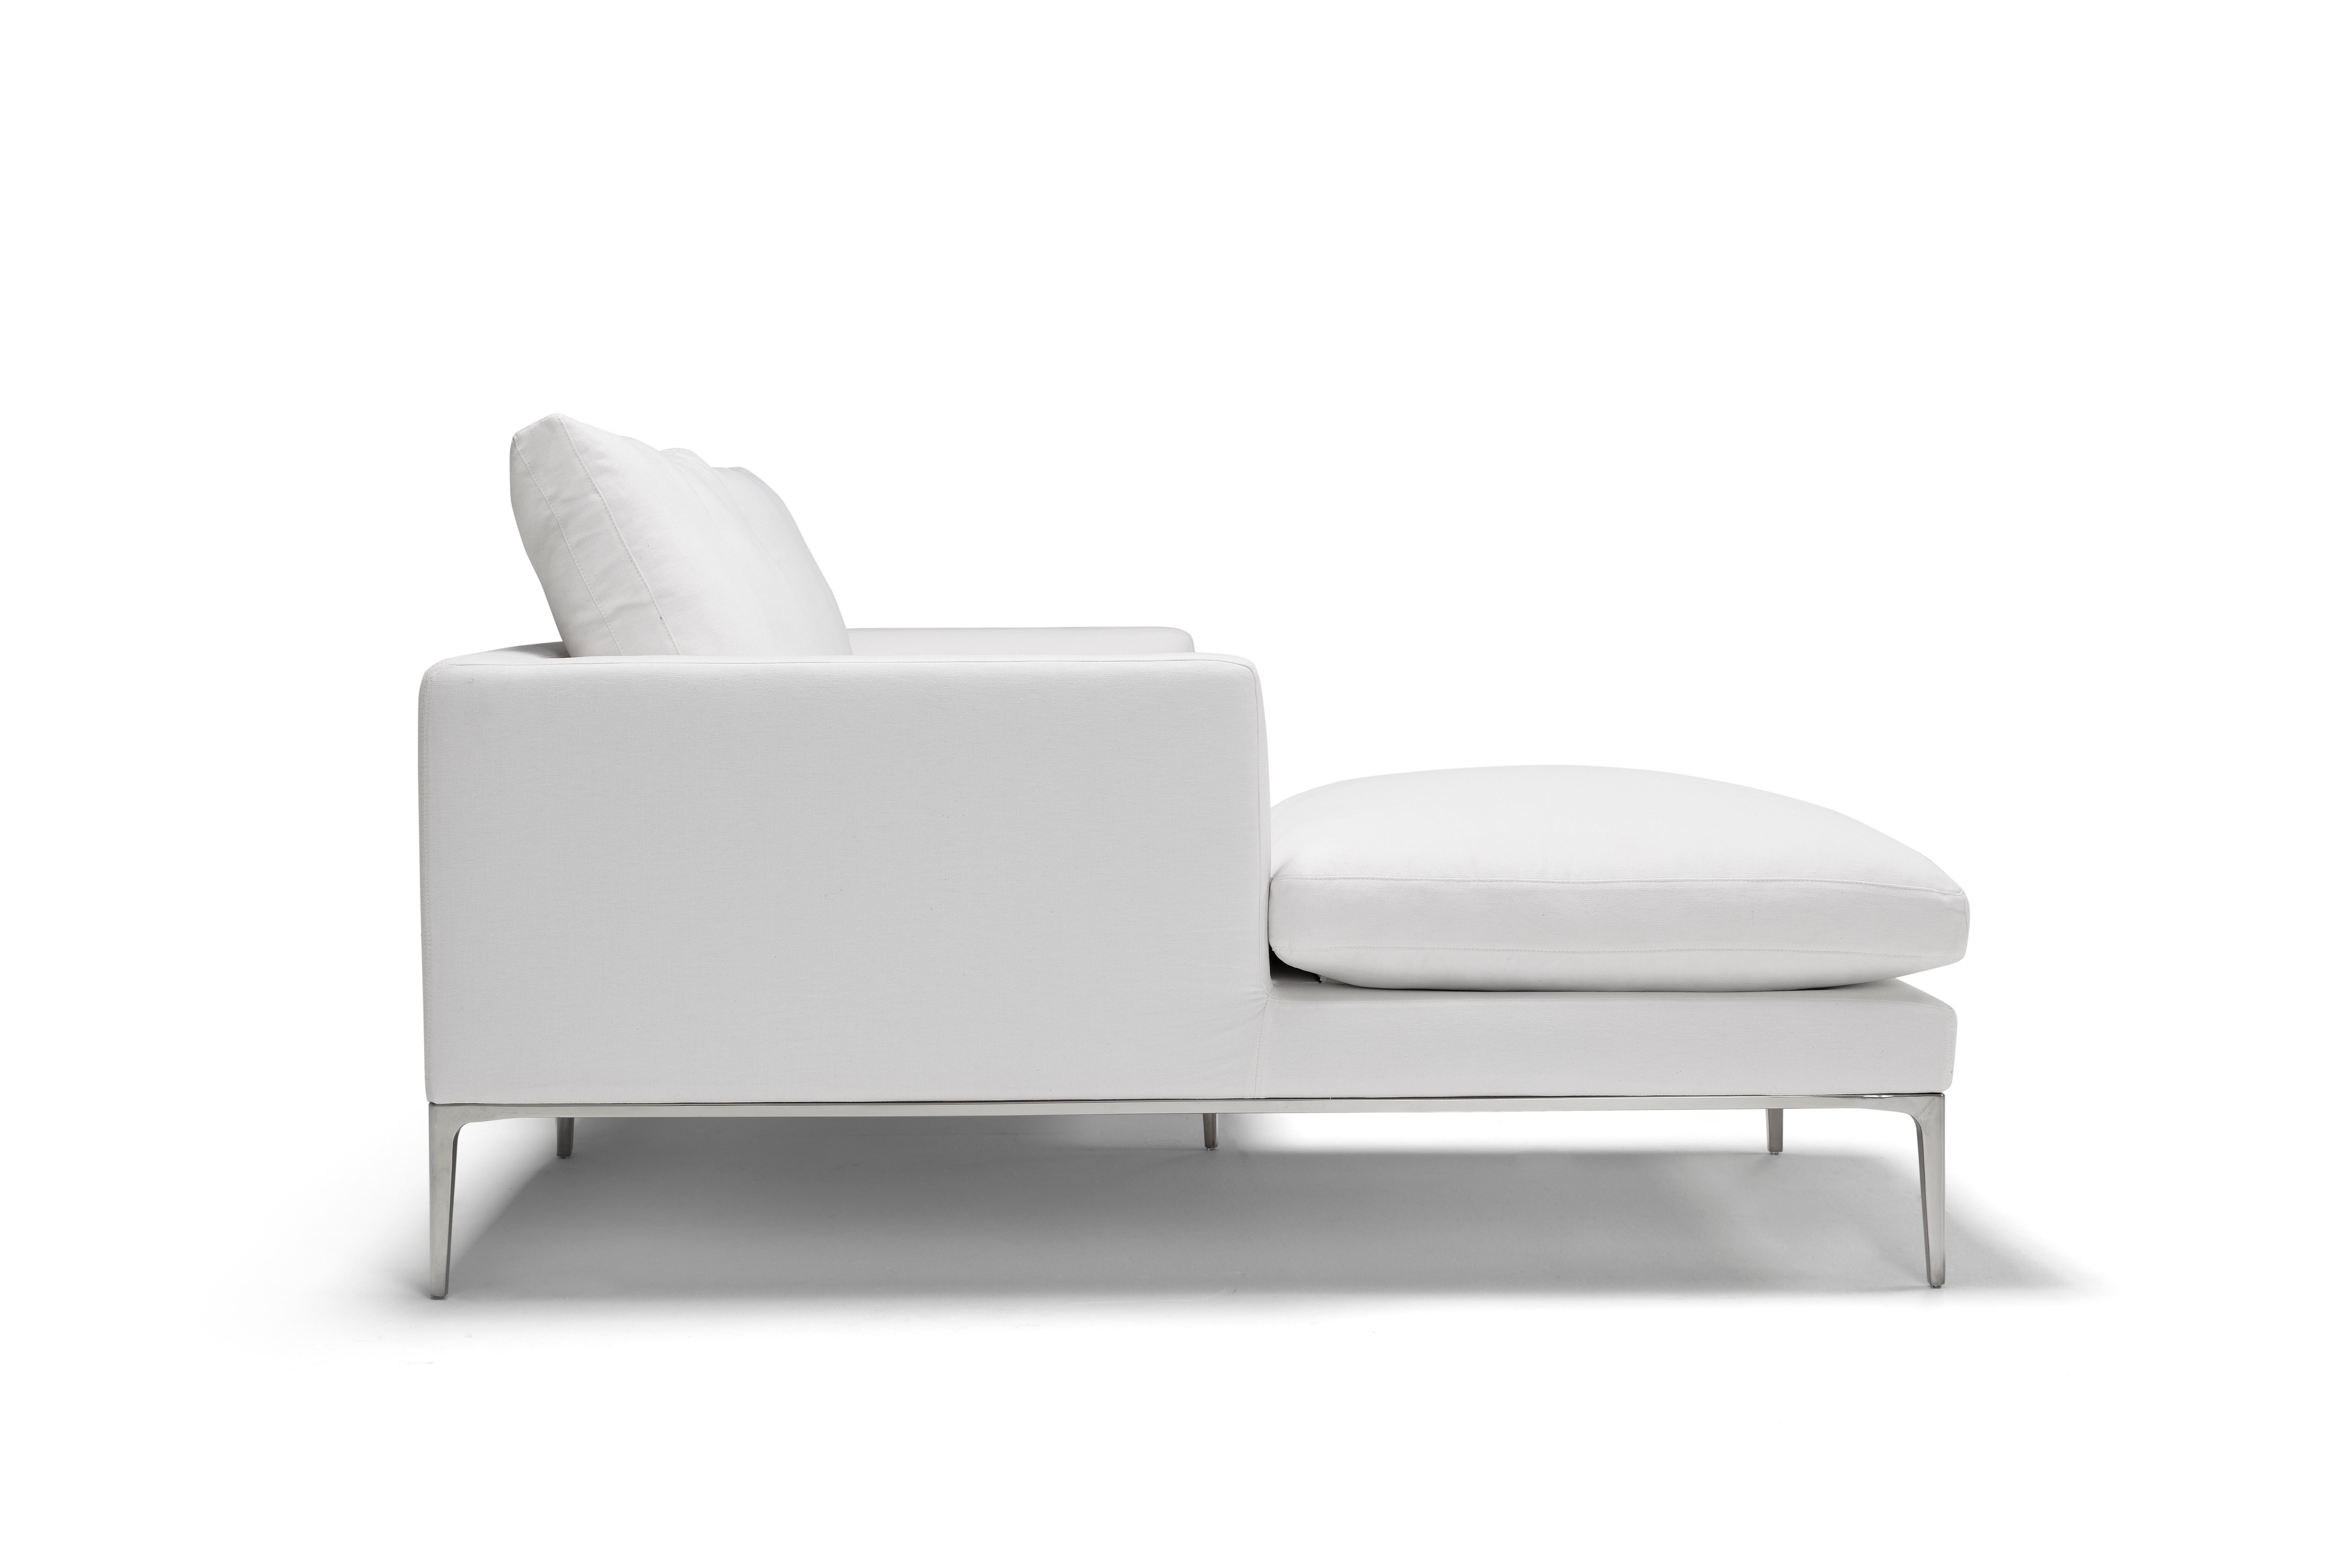 Amura 'Leonard' Chaise Lounge Sofa in White Fabric by Emanuel Gargano In New Condition For Sale In GRUMO APPULA (BA), IT